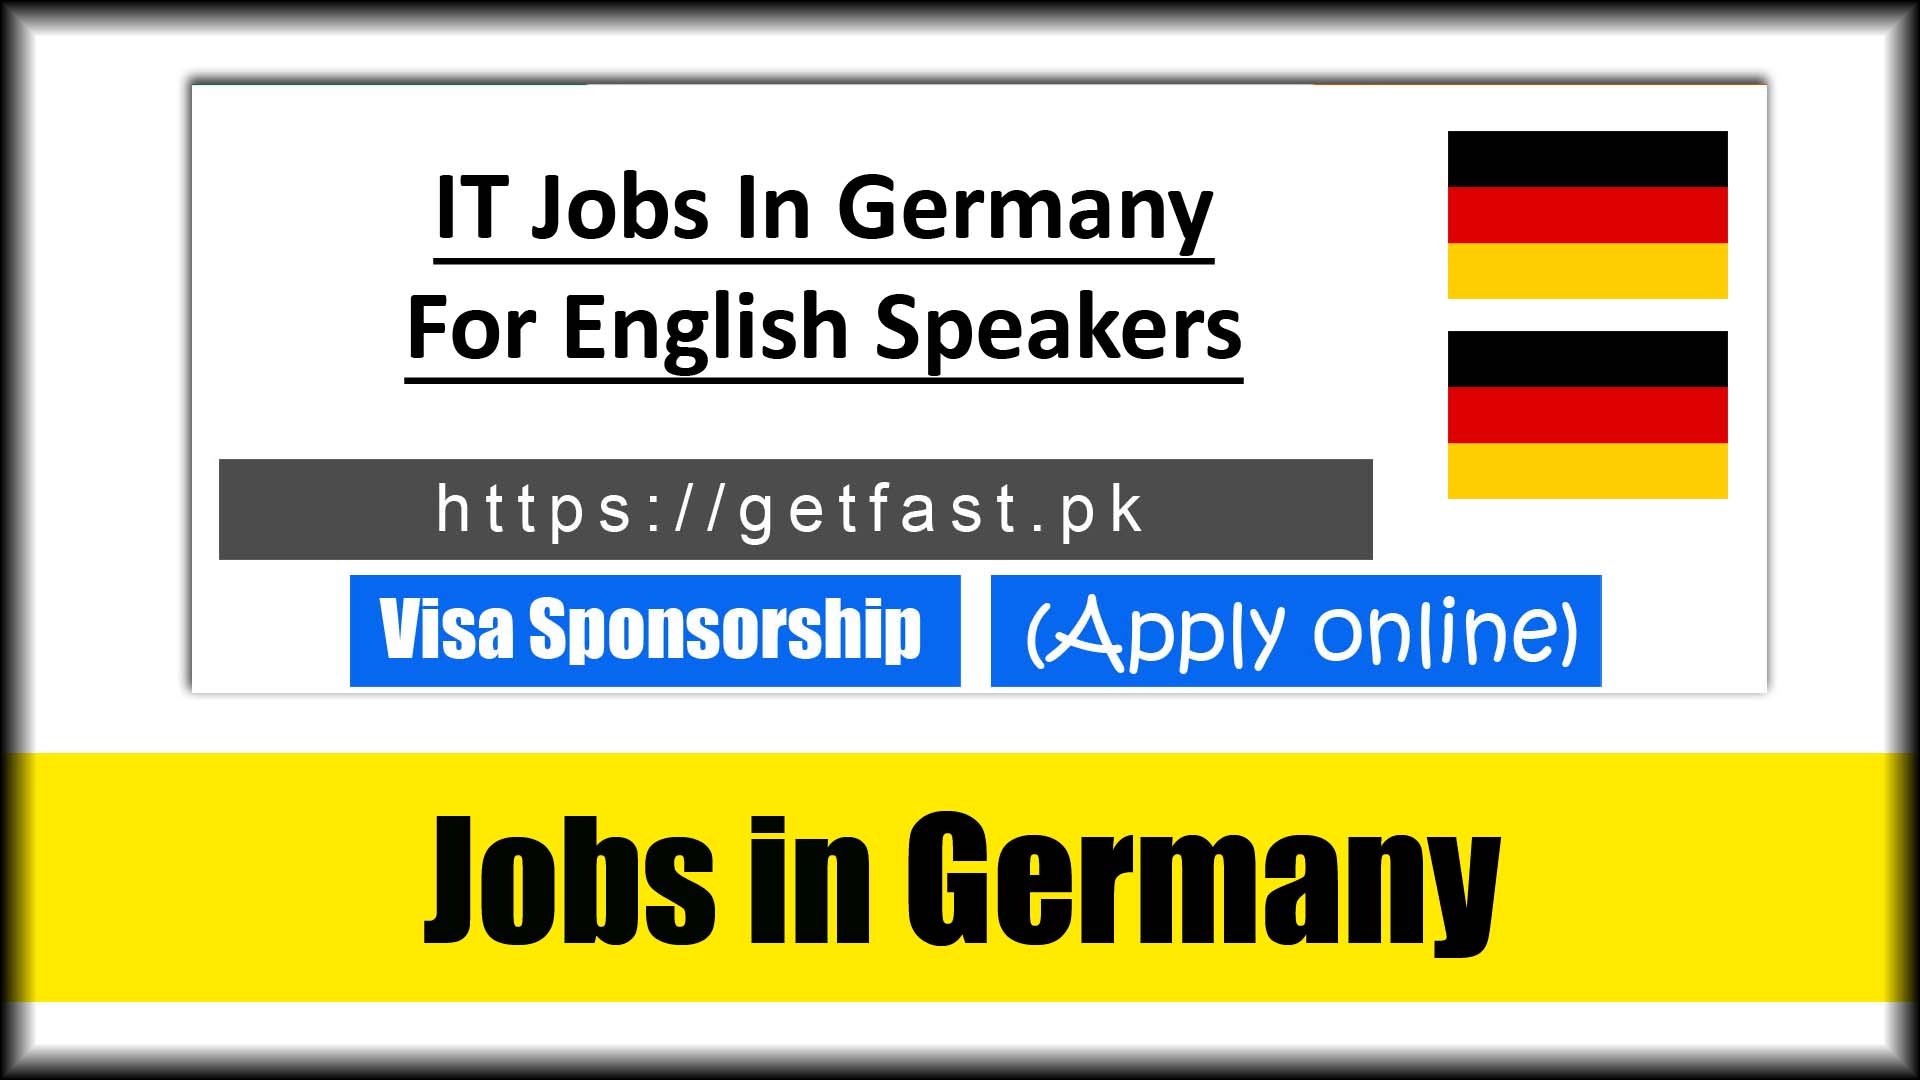 IT Jobs In Germany For English Speakers